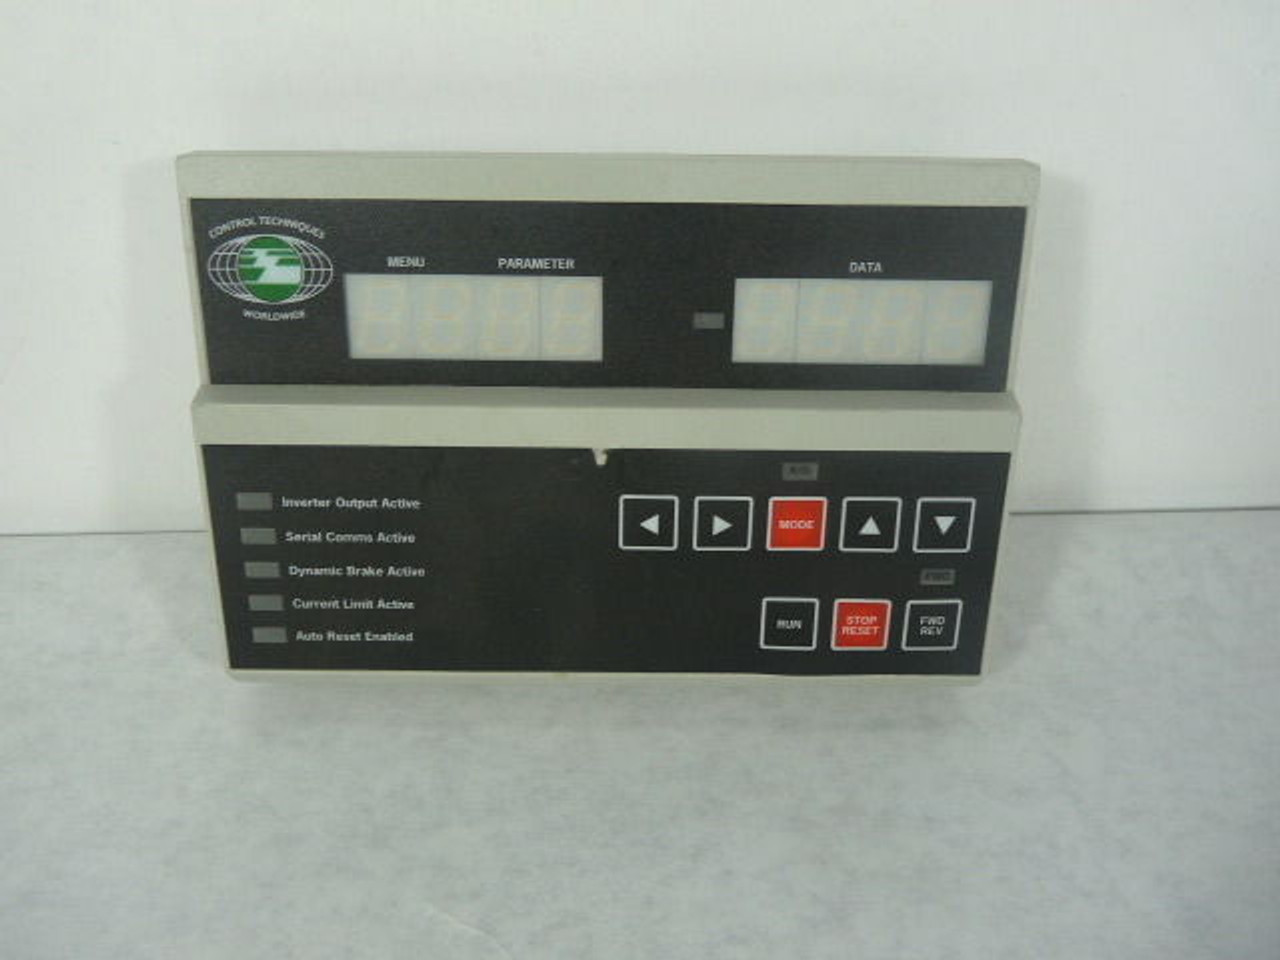 Emerson DCN-93825 Control Panel With Display USED